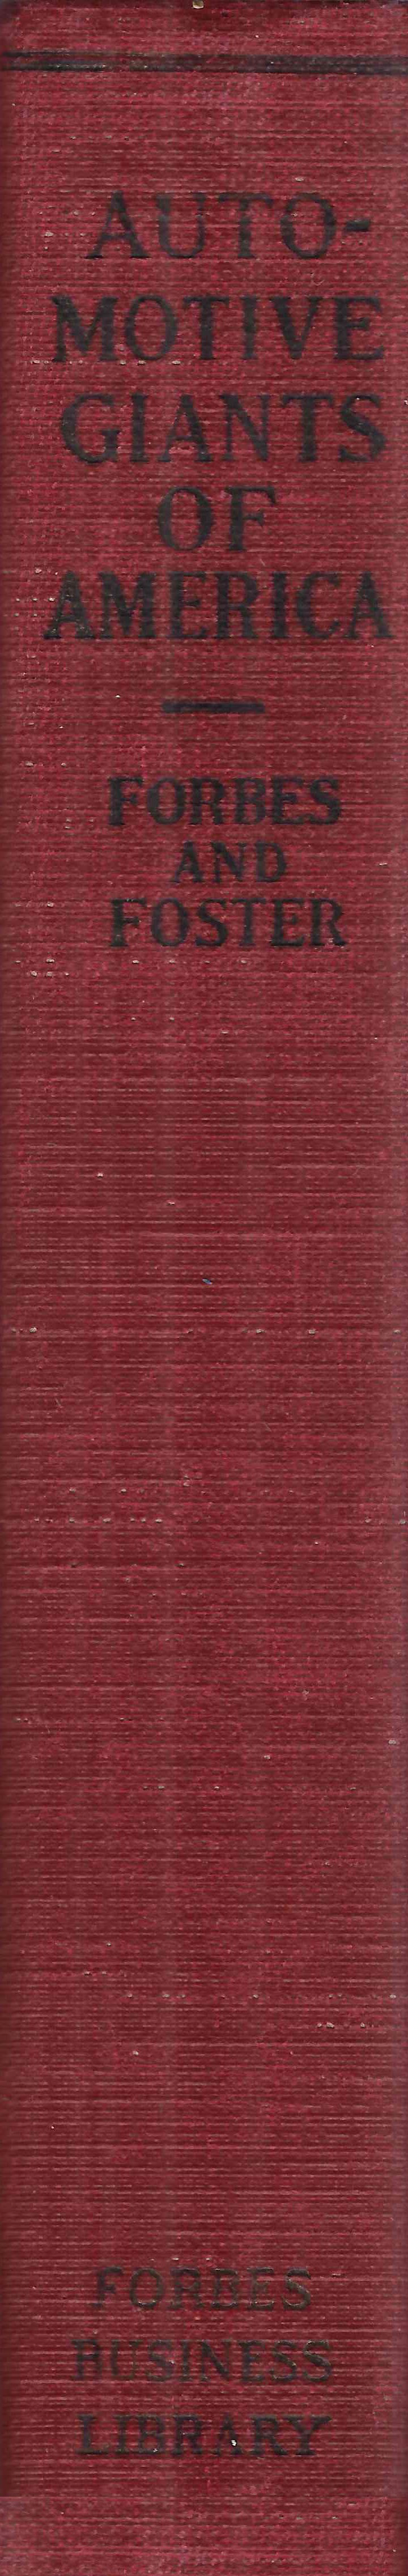 Image of the spine of B. C. Forbes' book 